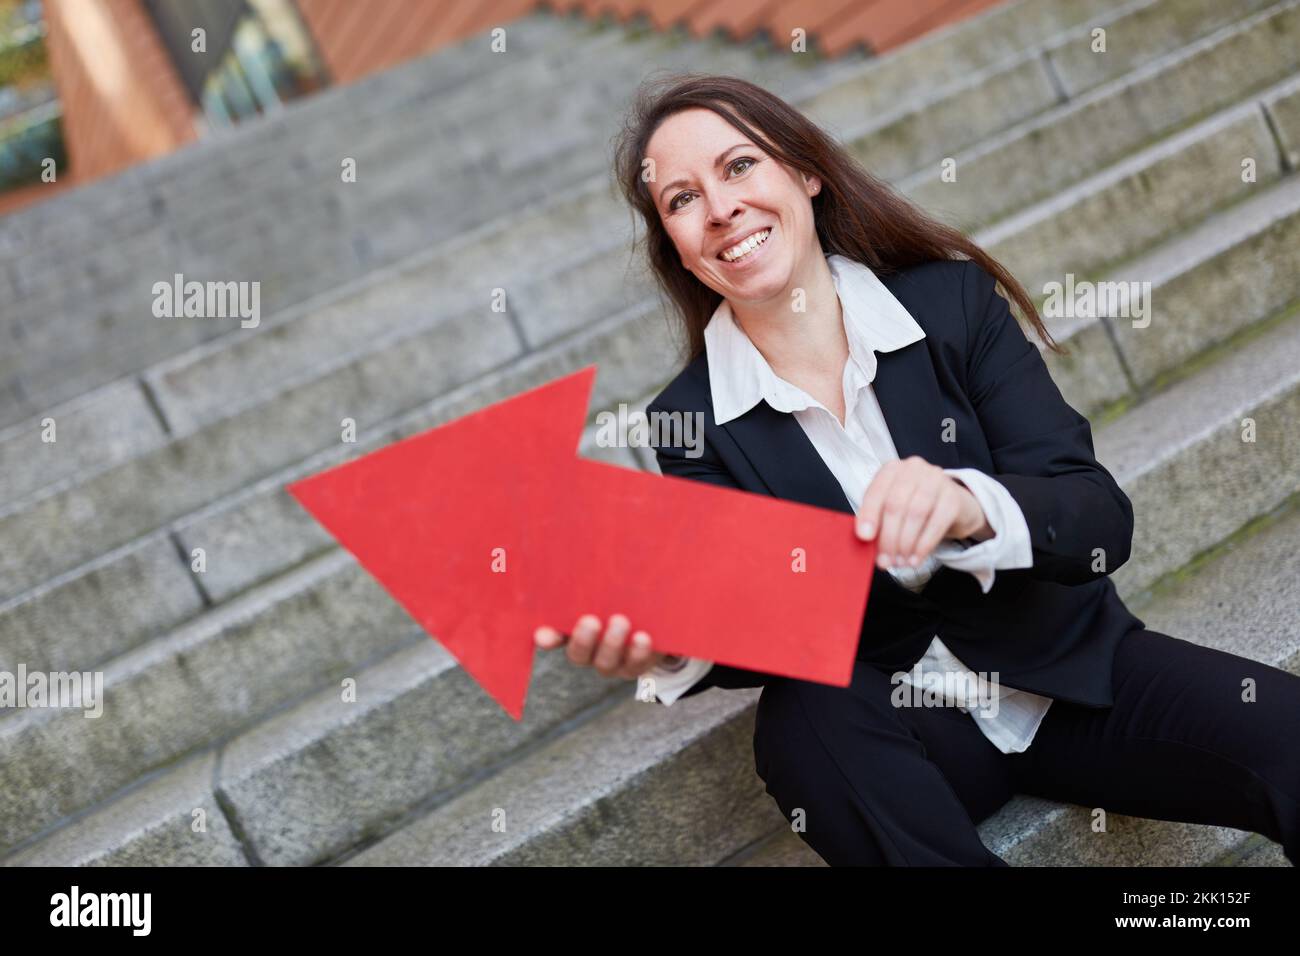 Successful businesswoman holding red arrow sign as sucess and career symbol Stock Photo